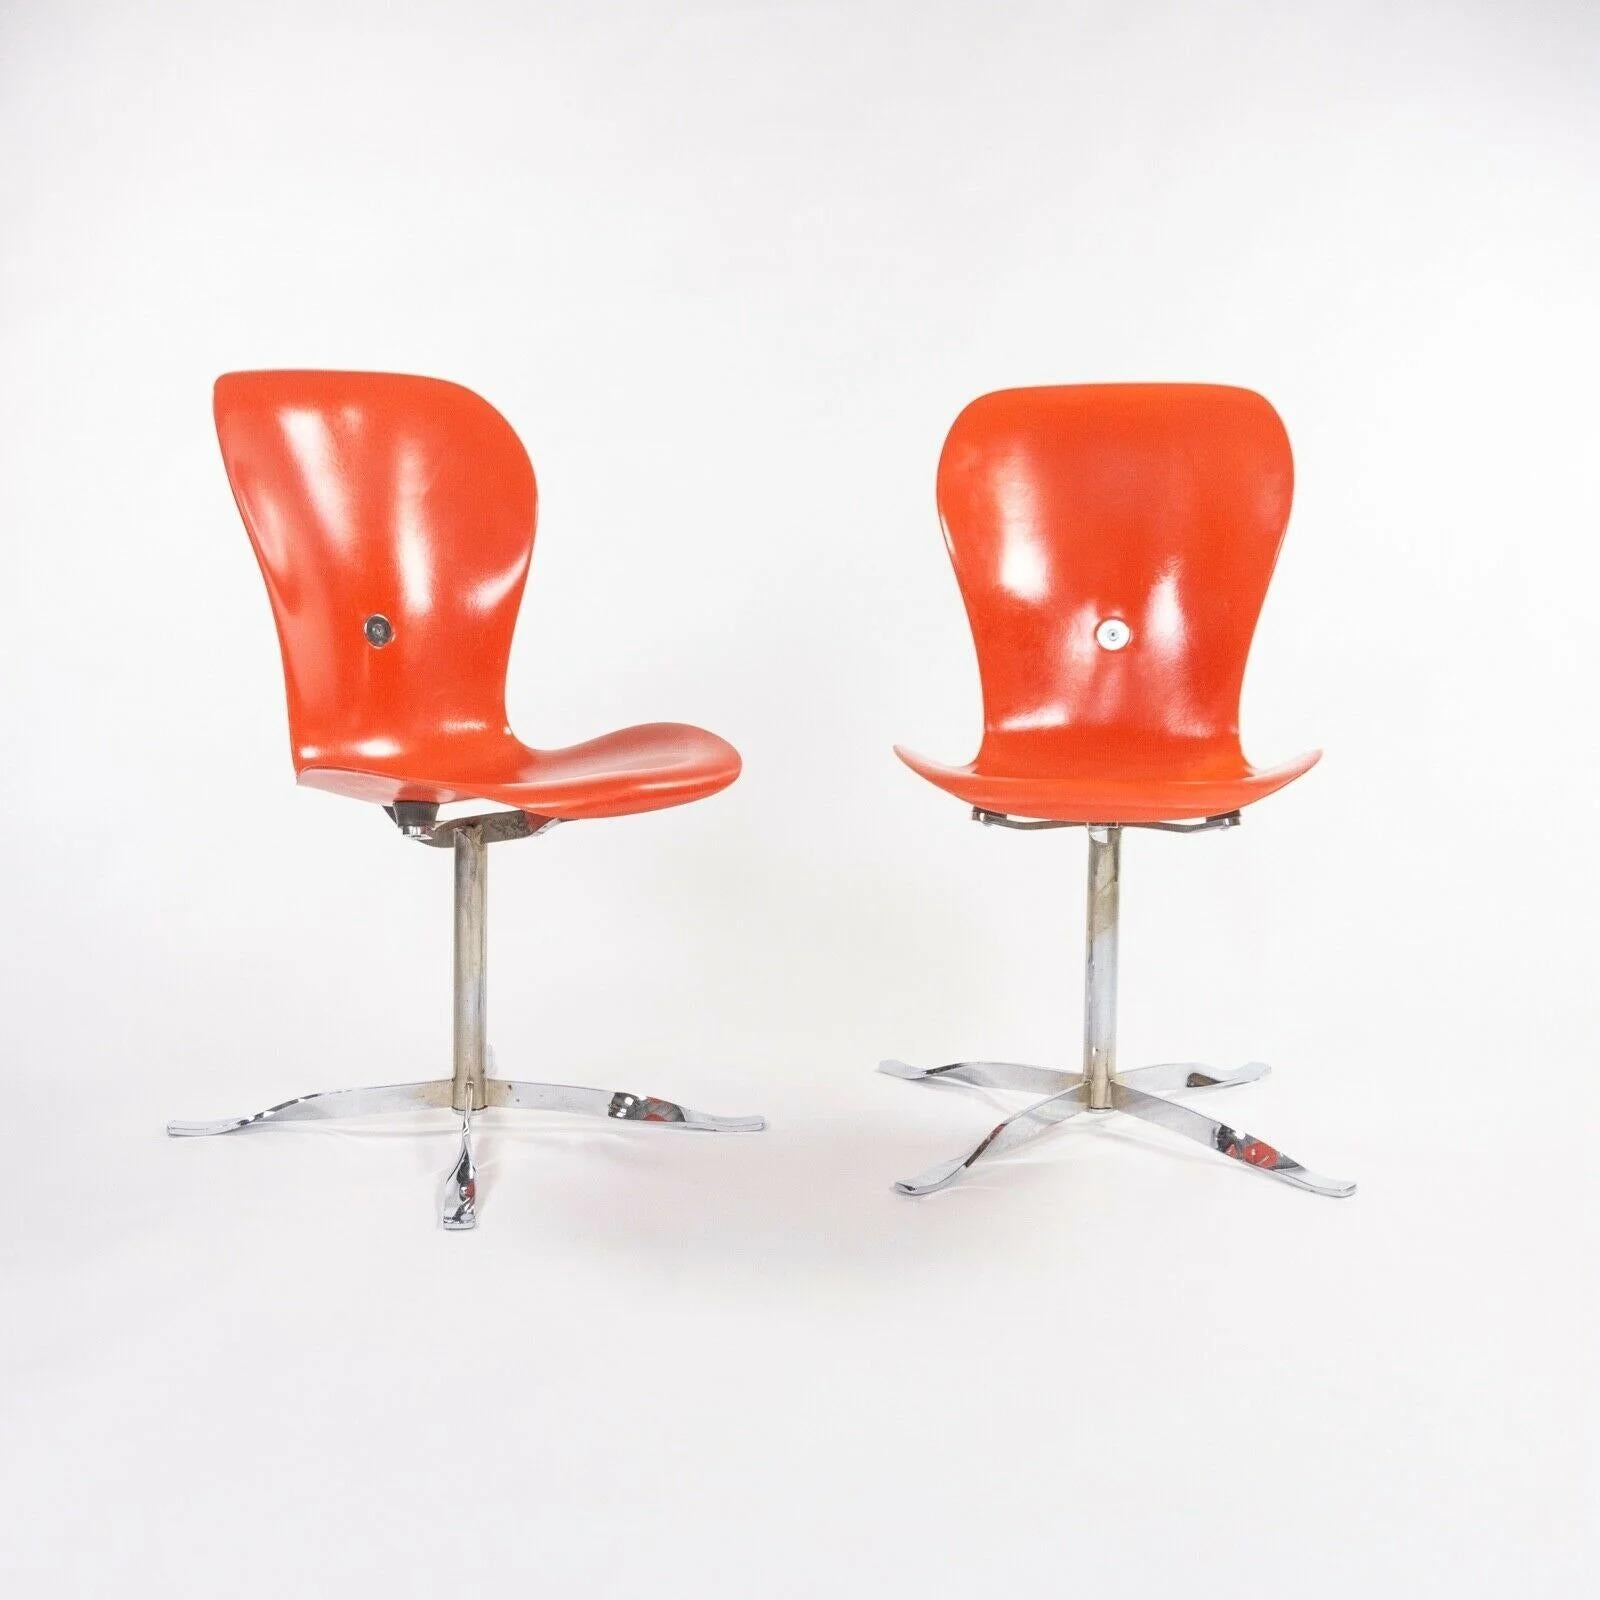 1974 Gideon Kramer Ion Chairs by American Desk Corp Fiberglass Sets Available In Good Condition For Sale In Philadelphia, PA